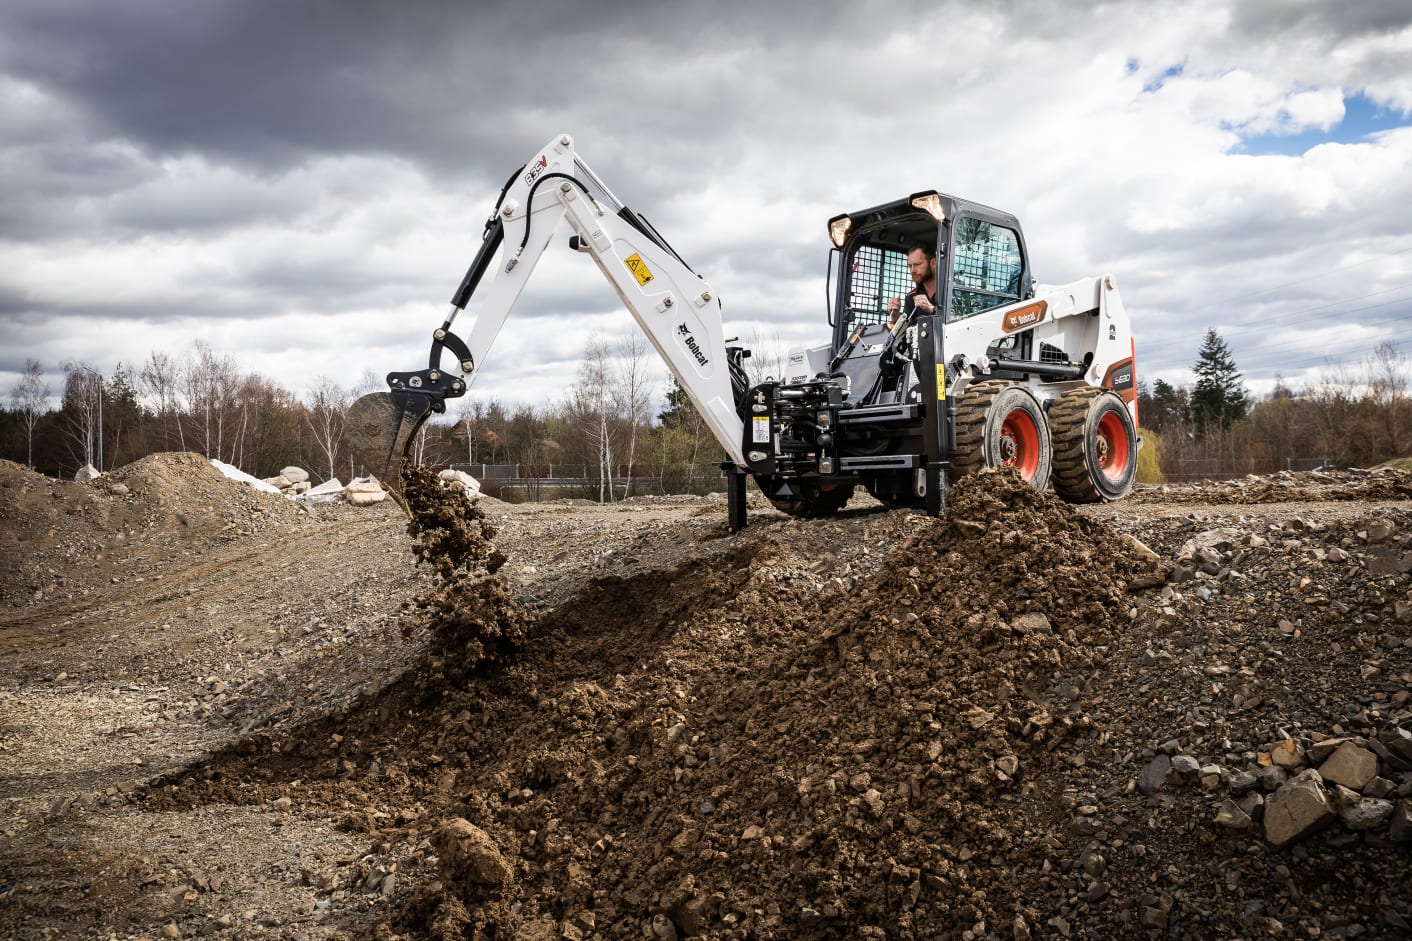 Browse Specs and more for the Bobcat S630 Skid-Steer Loader - Bobcat of North Texas